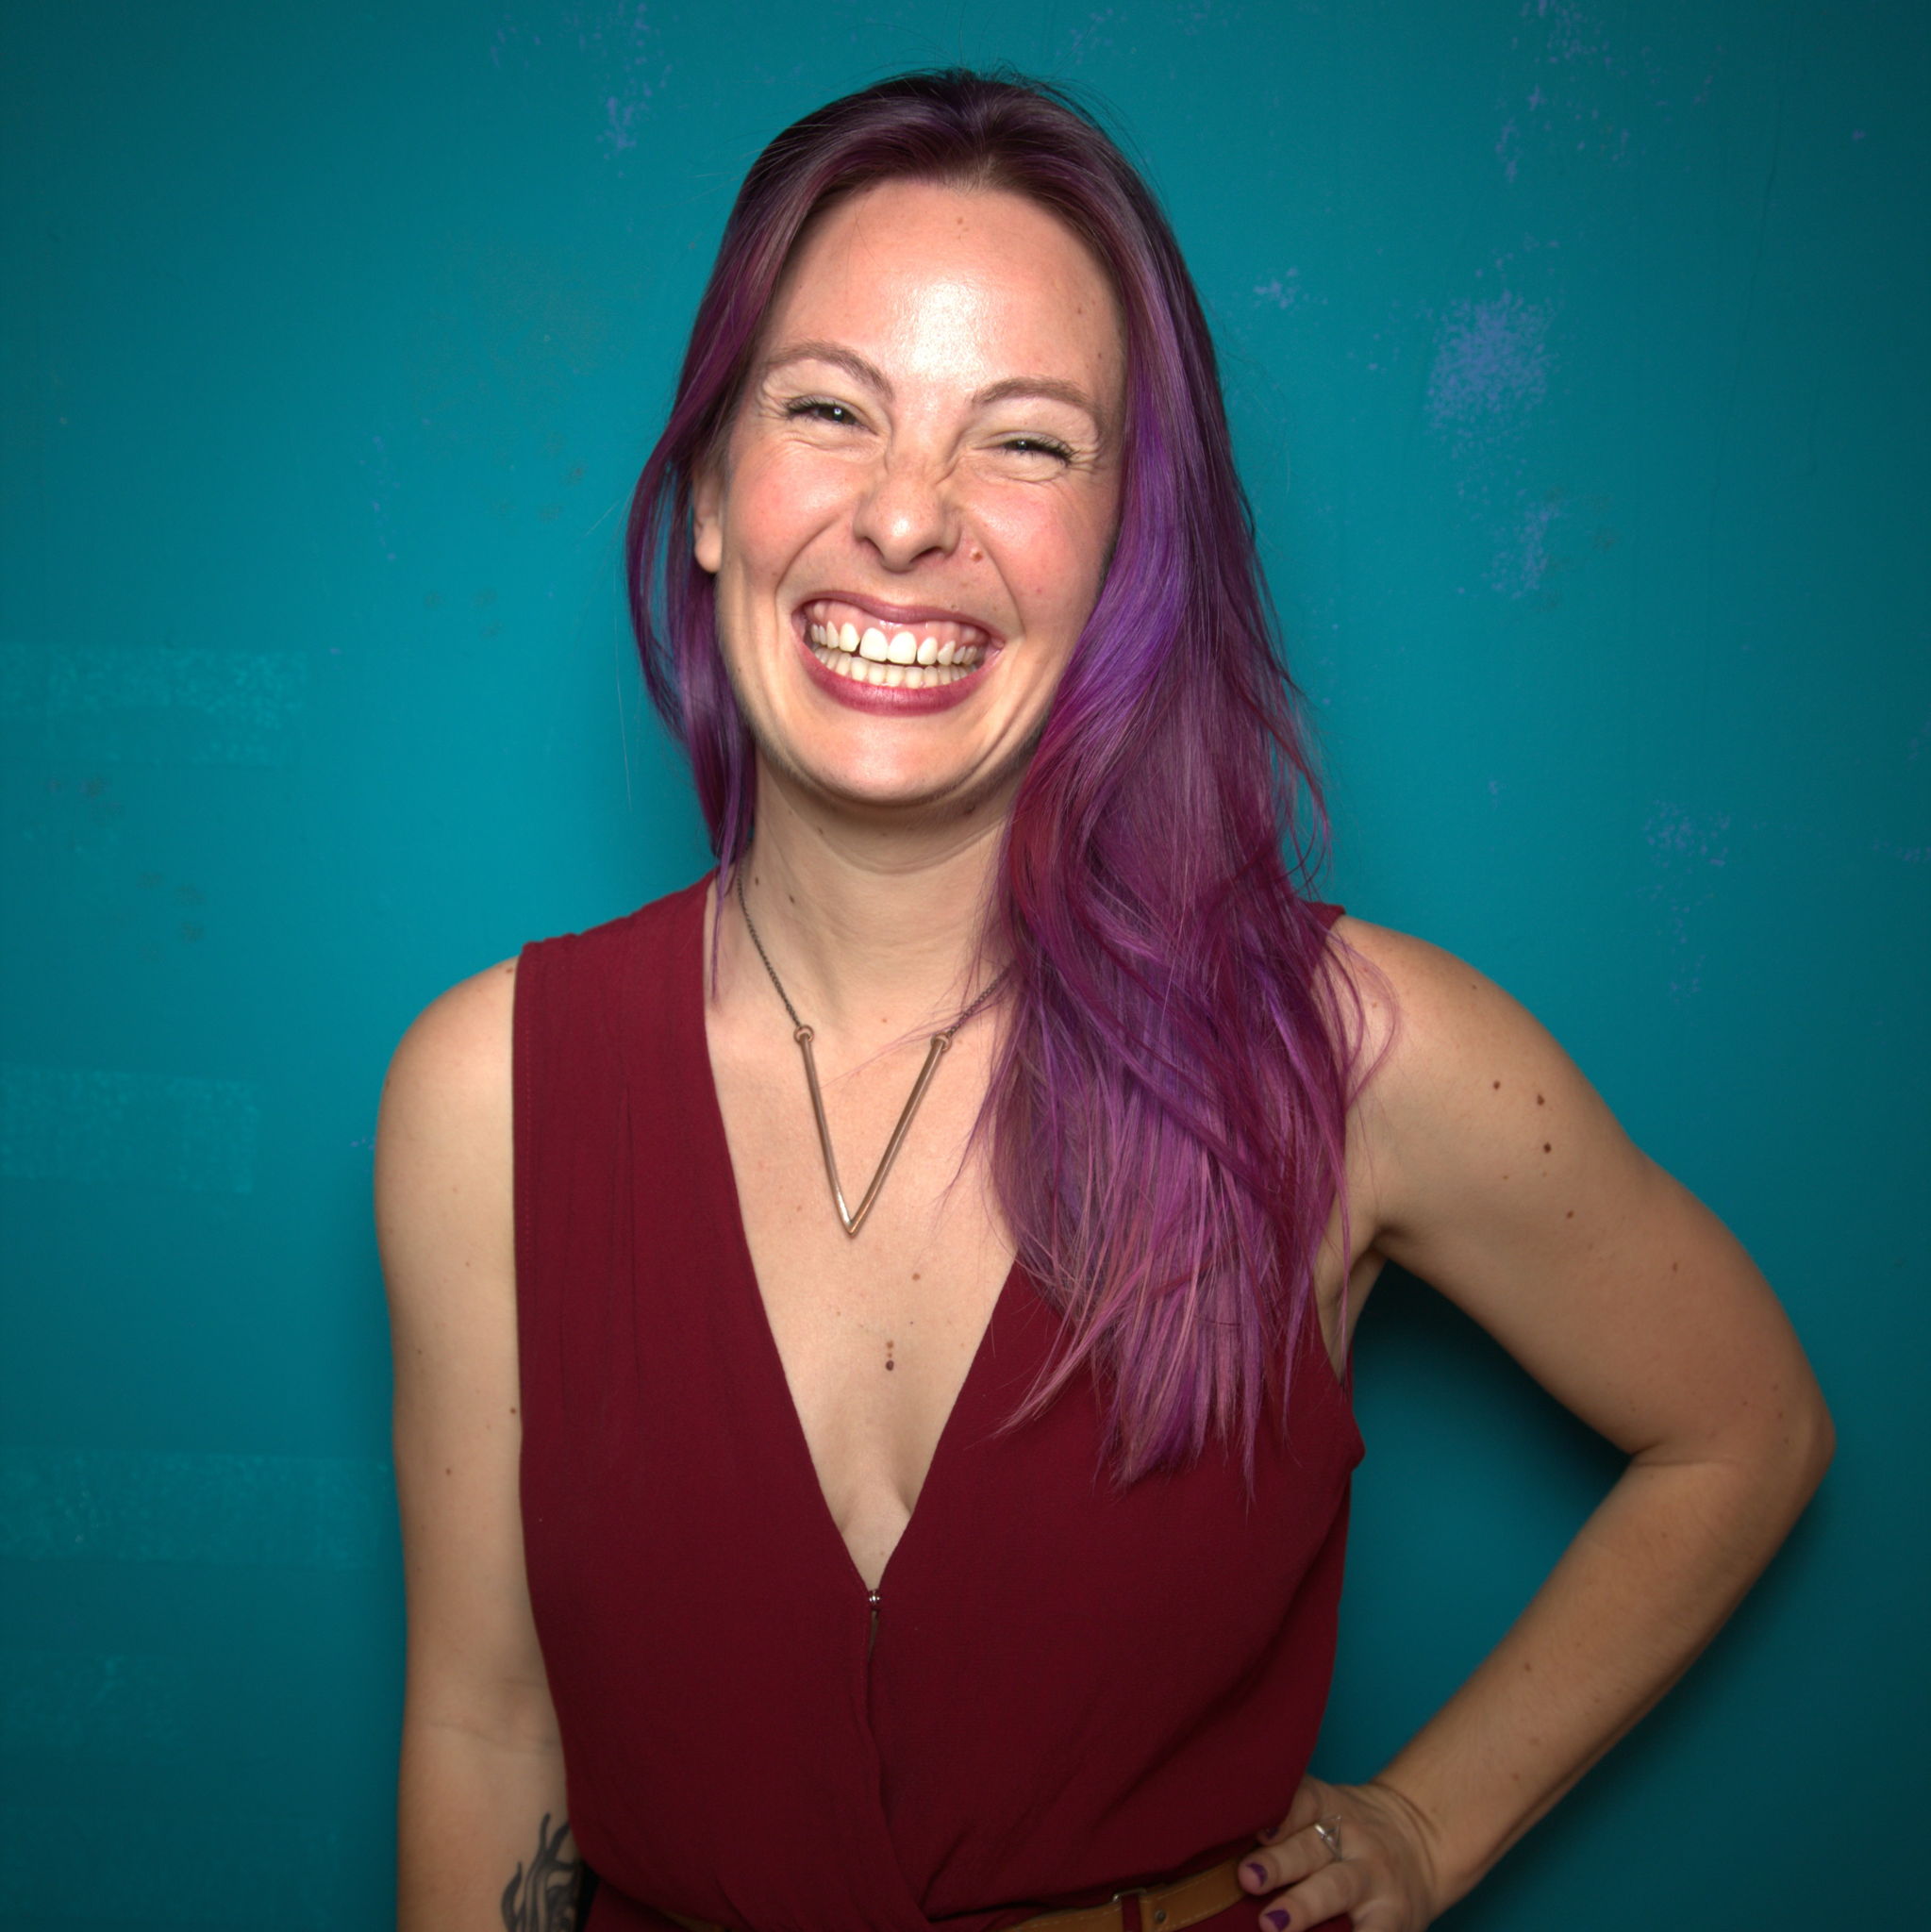 Photo of Amber Rollo wearing a red dress, purple hair and a big smile, against a teal background.